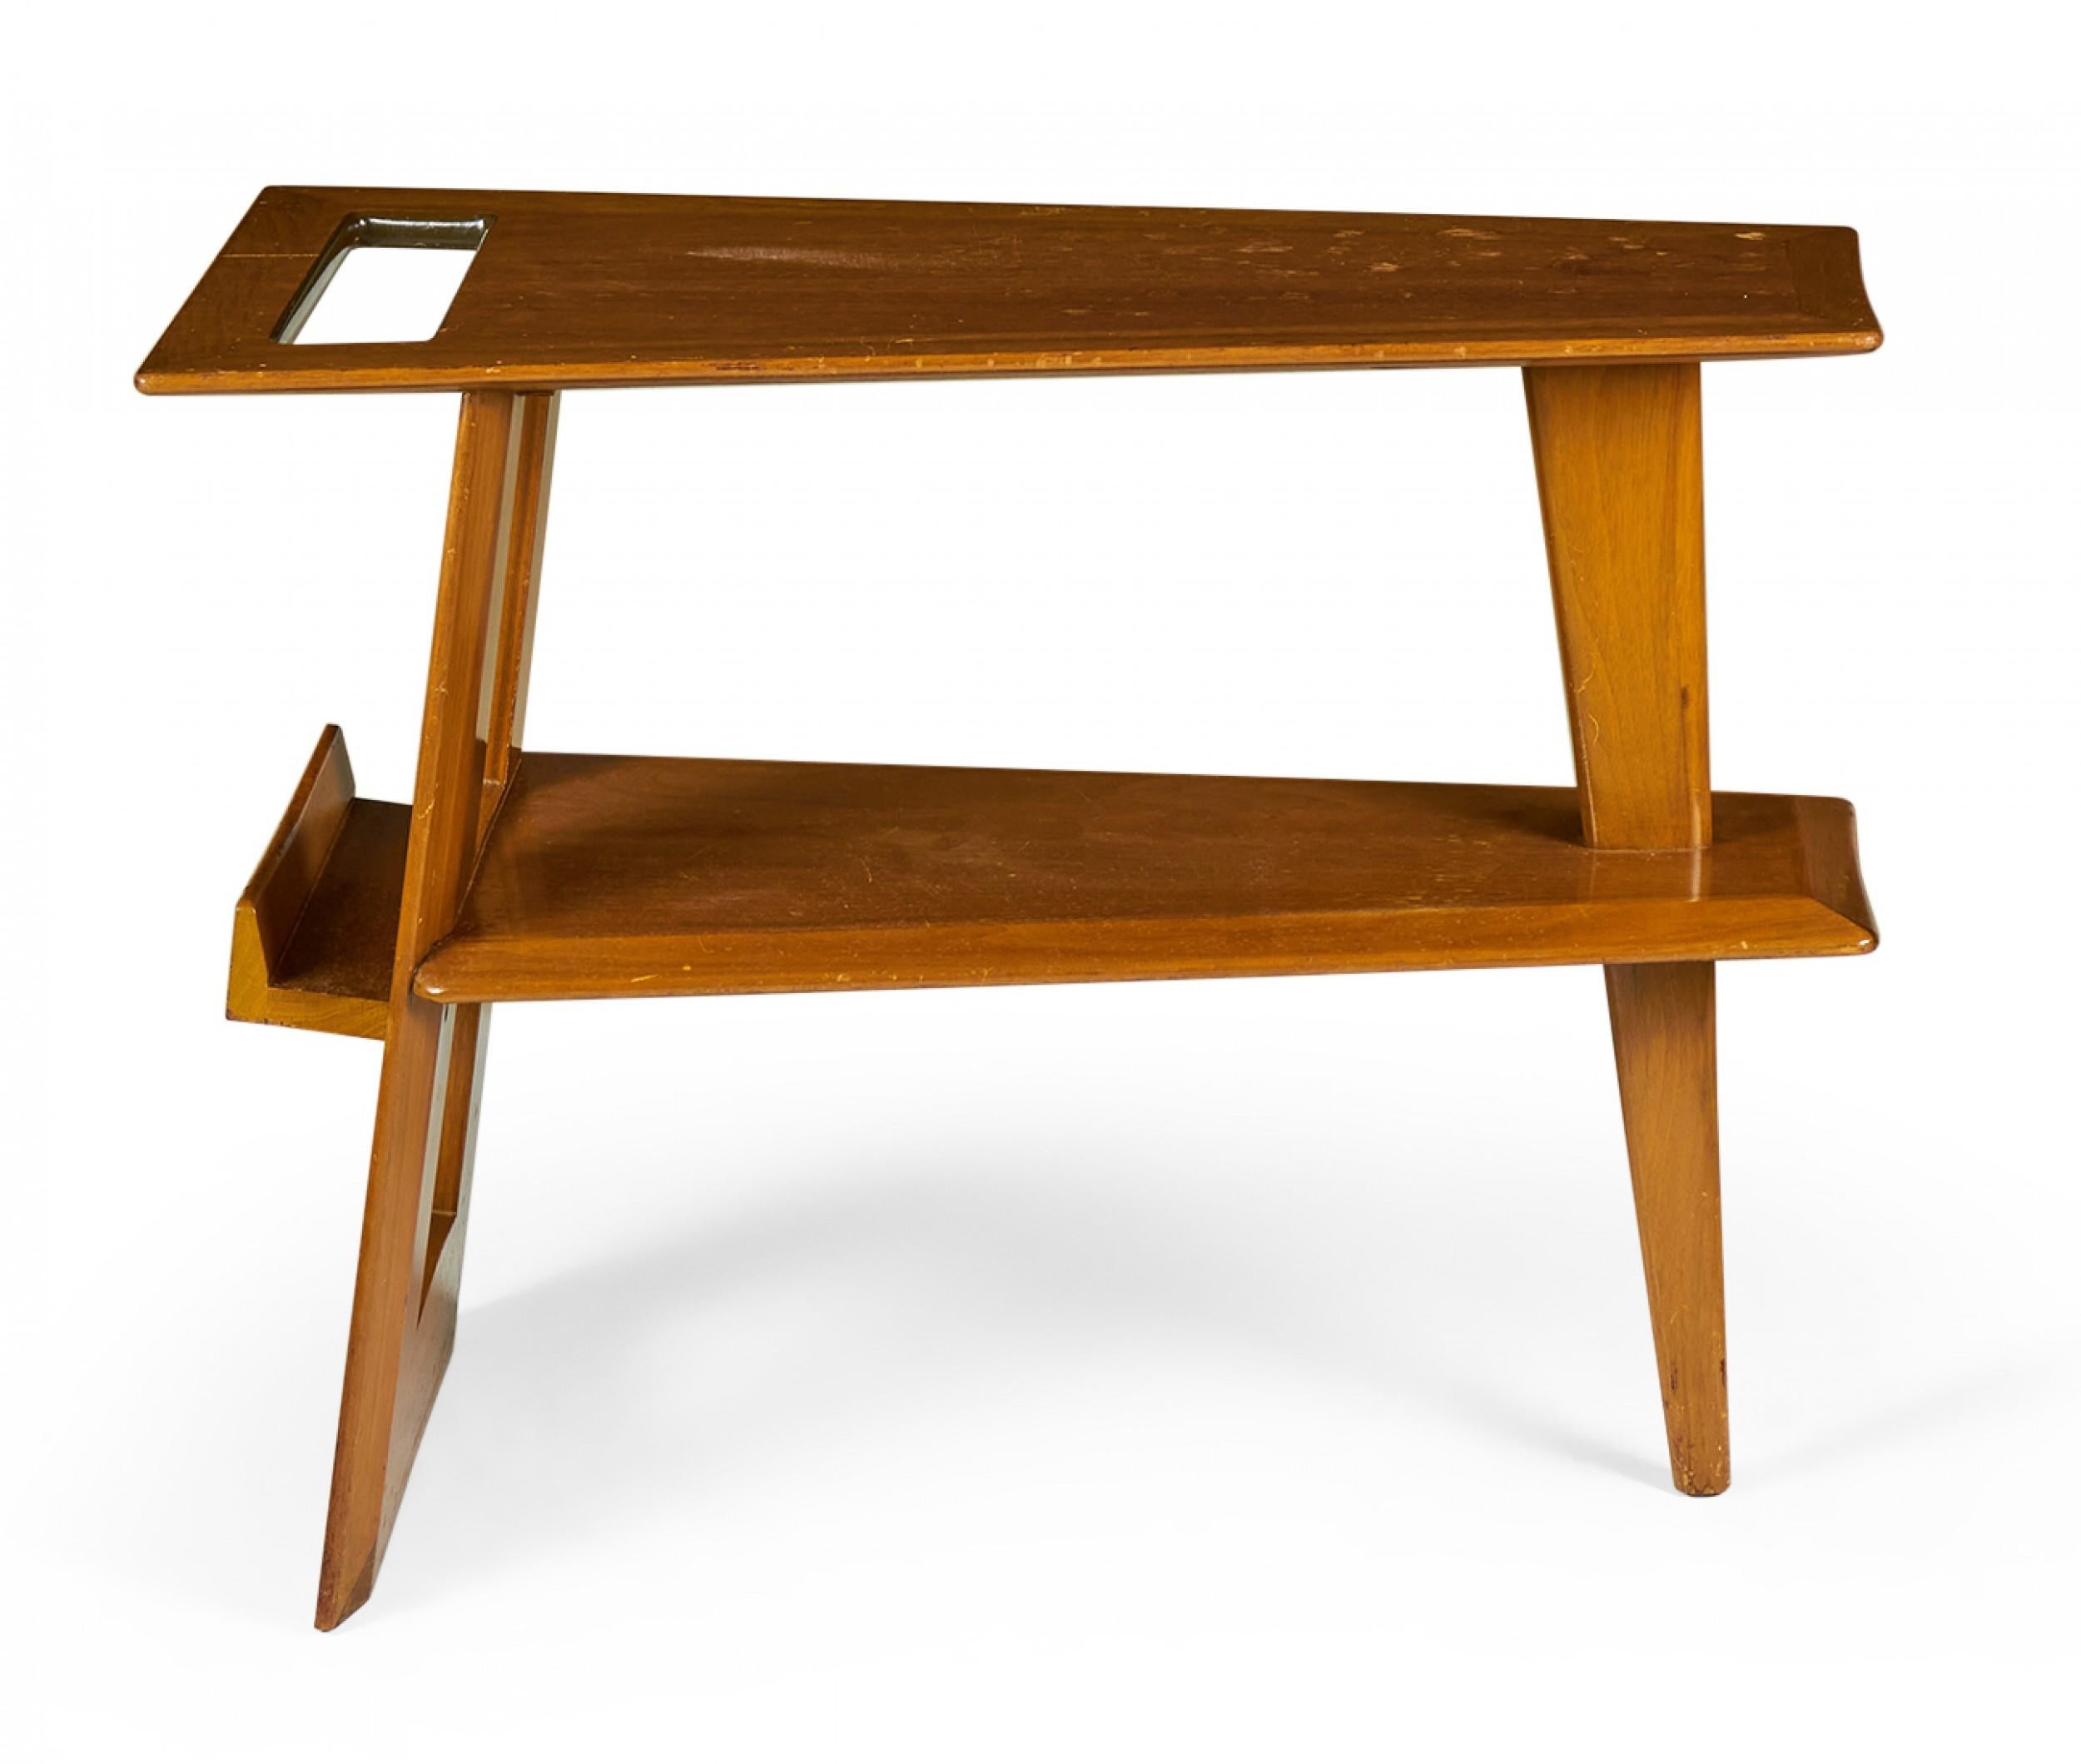 Danish Mid-Century Walnut Wedge Magazine Table (manner of Jens Risom) In Good Condition For Sale In New York, NY